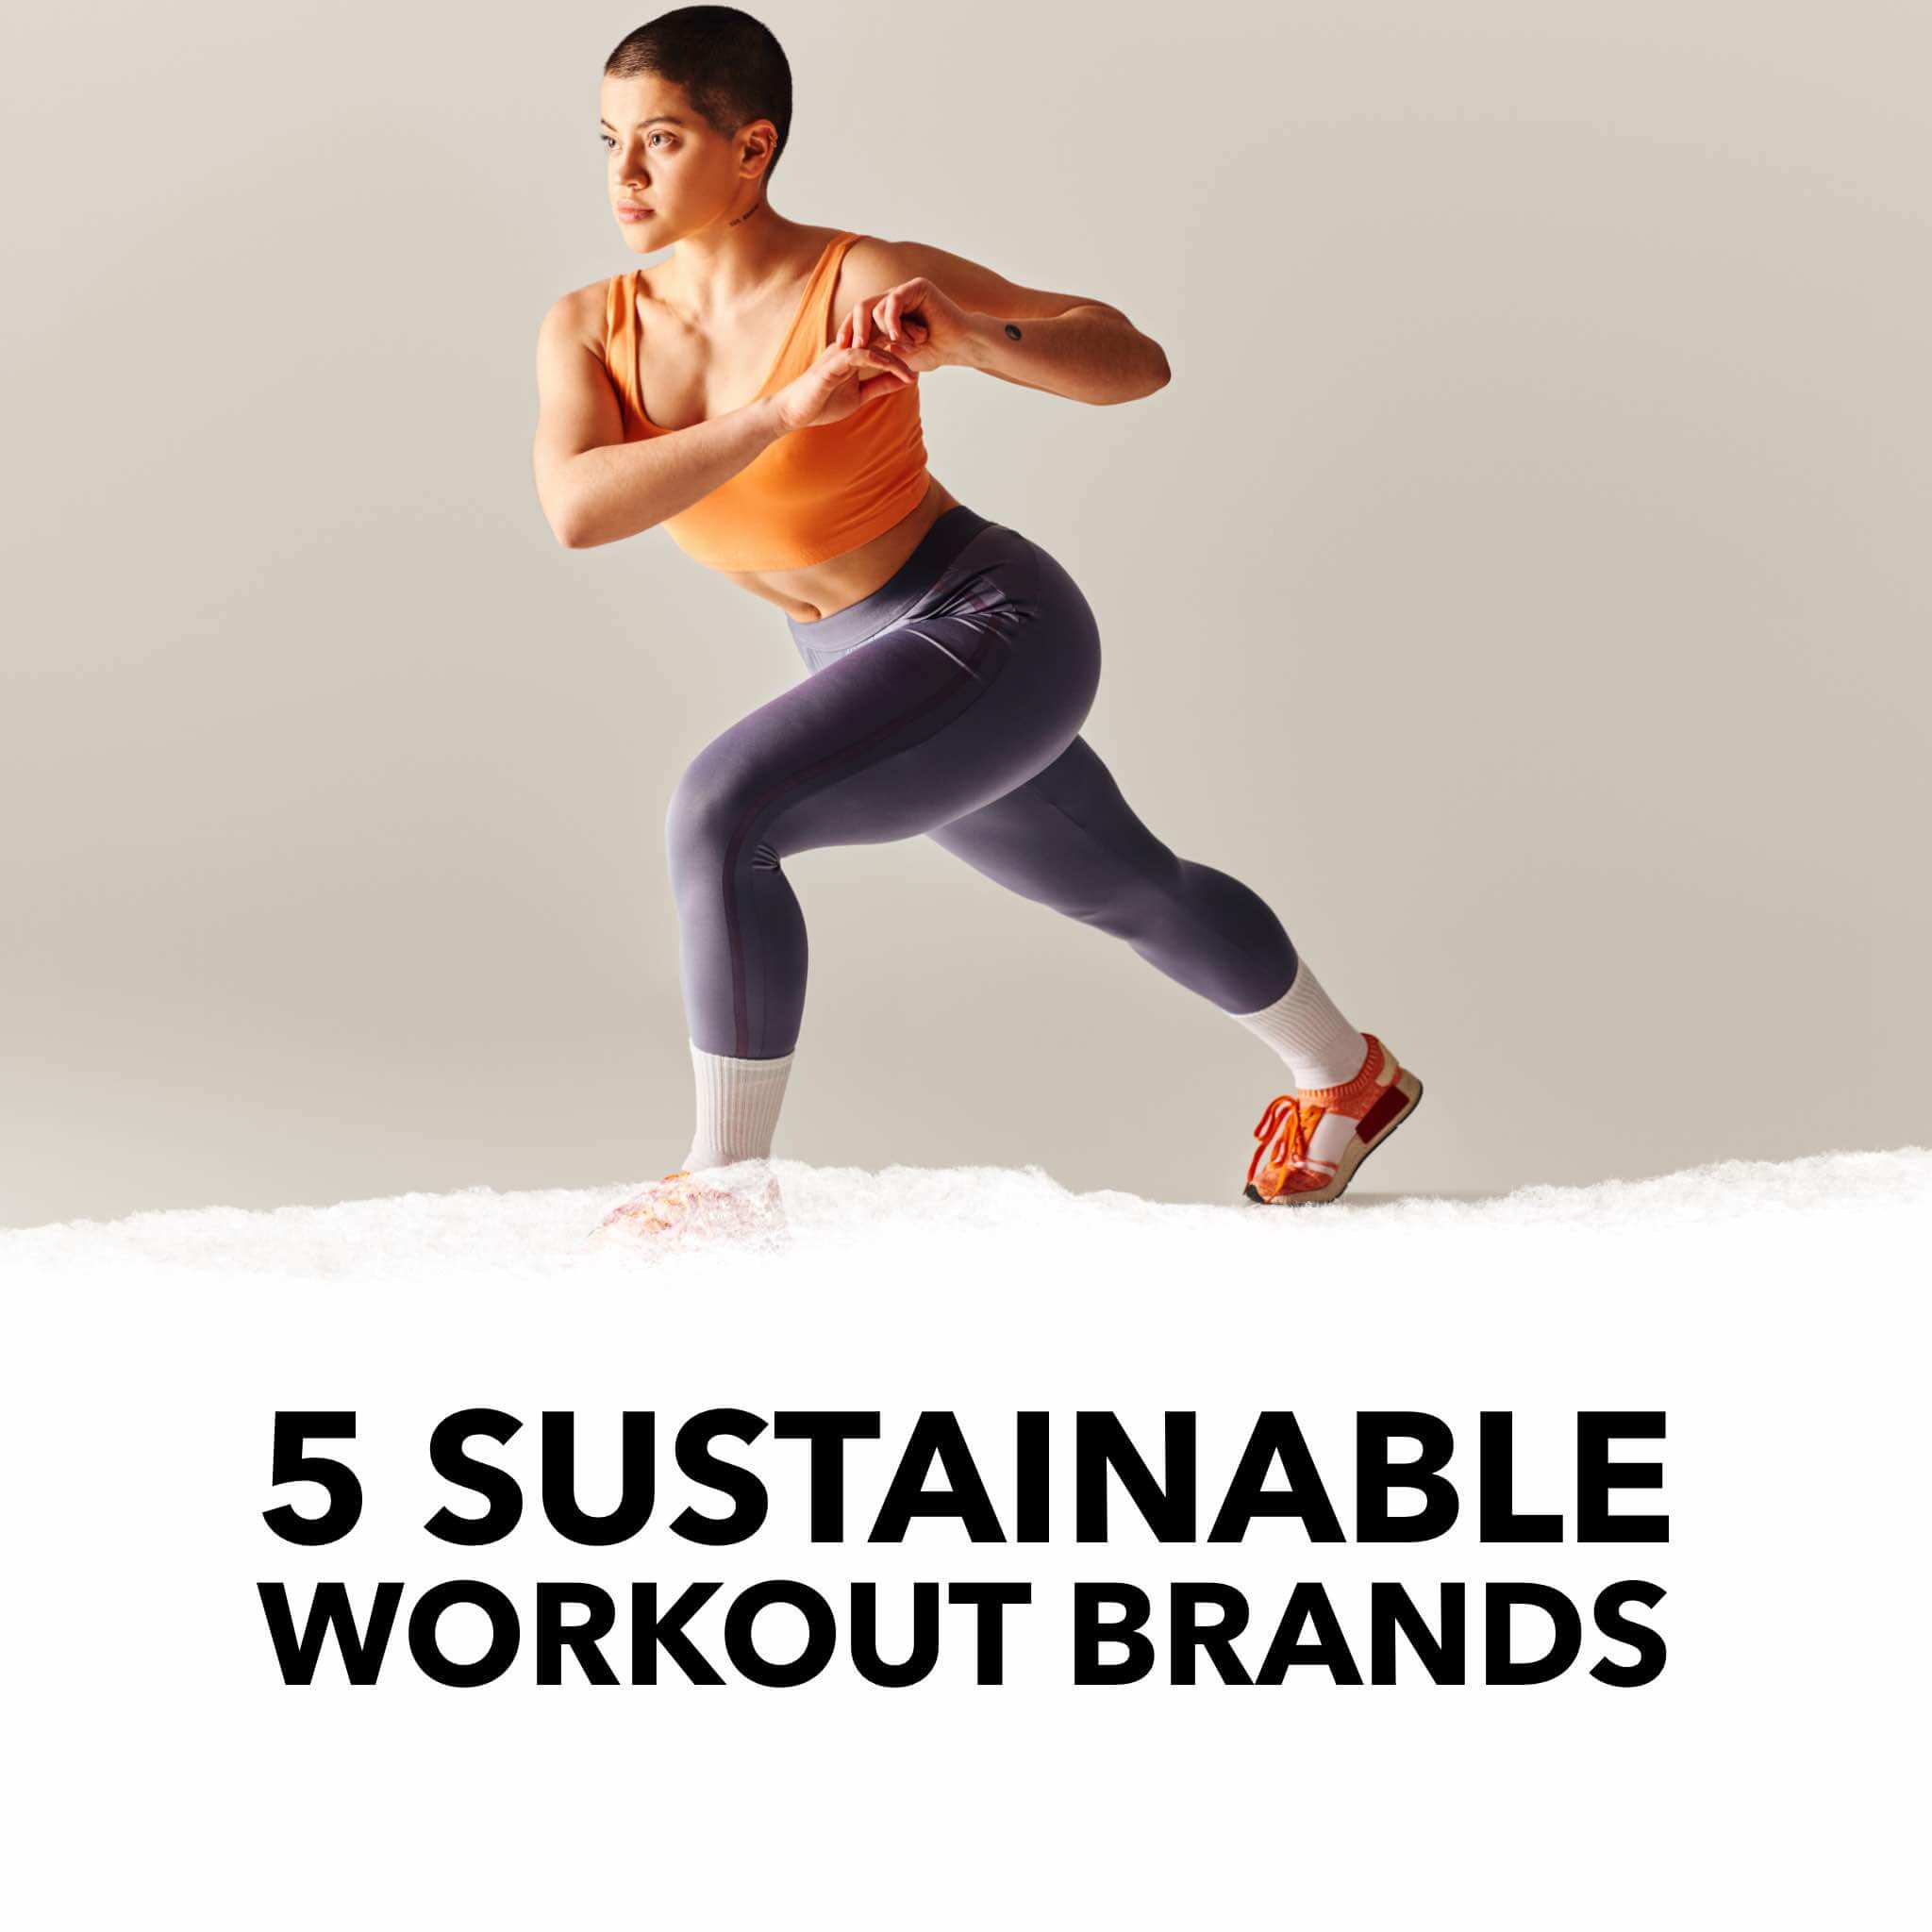 5 Sustainable Workout Brands